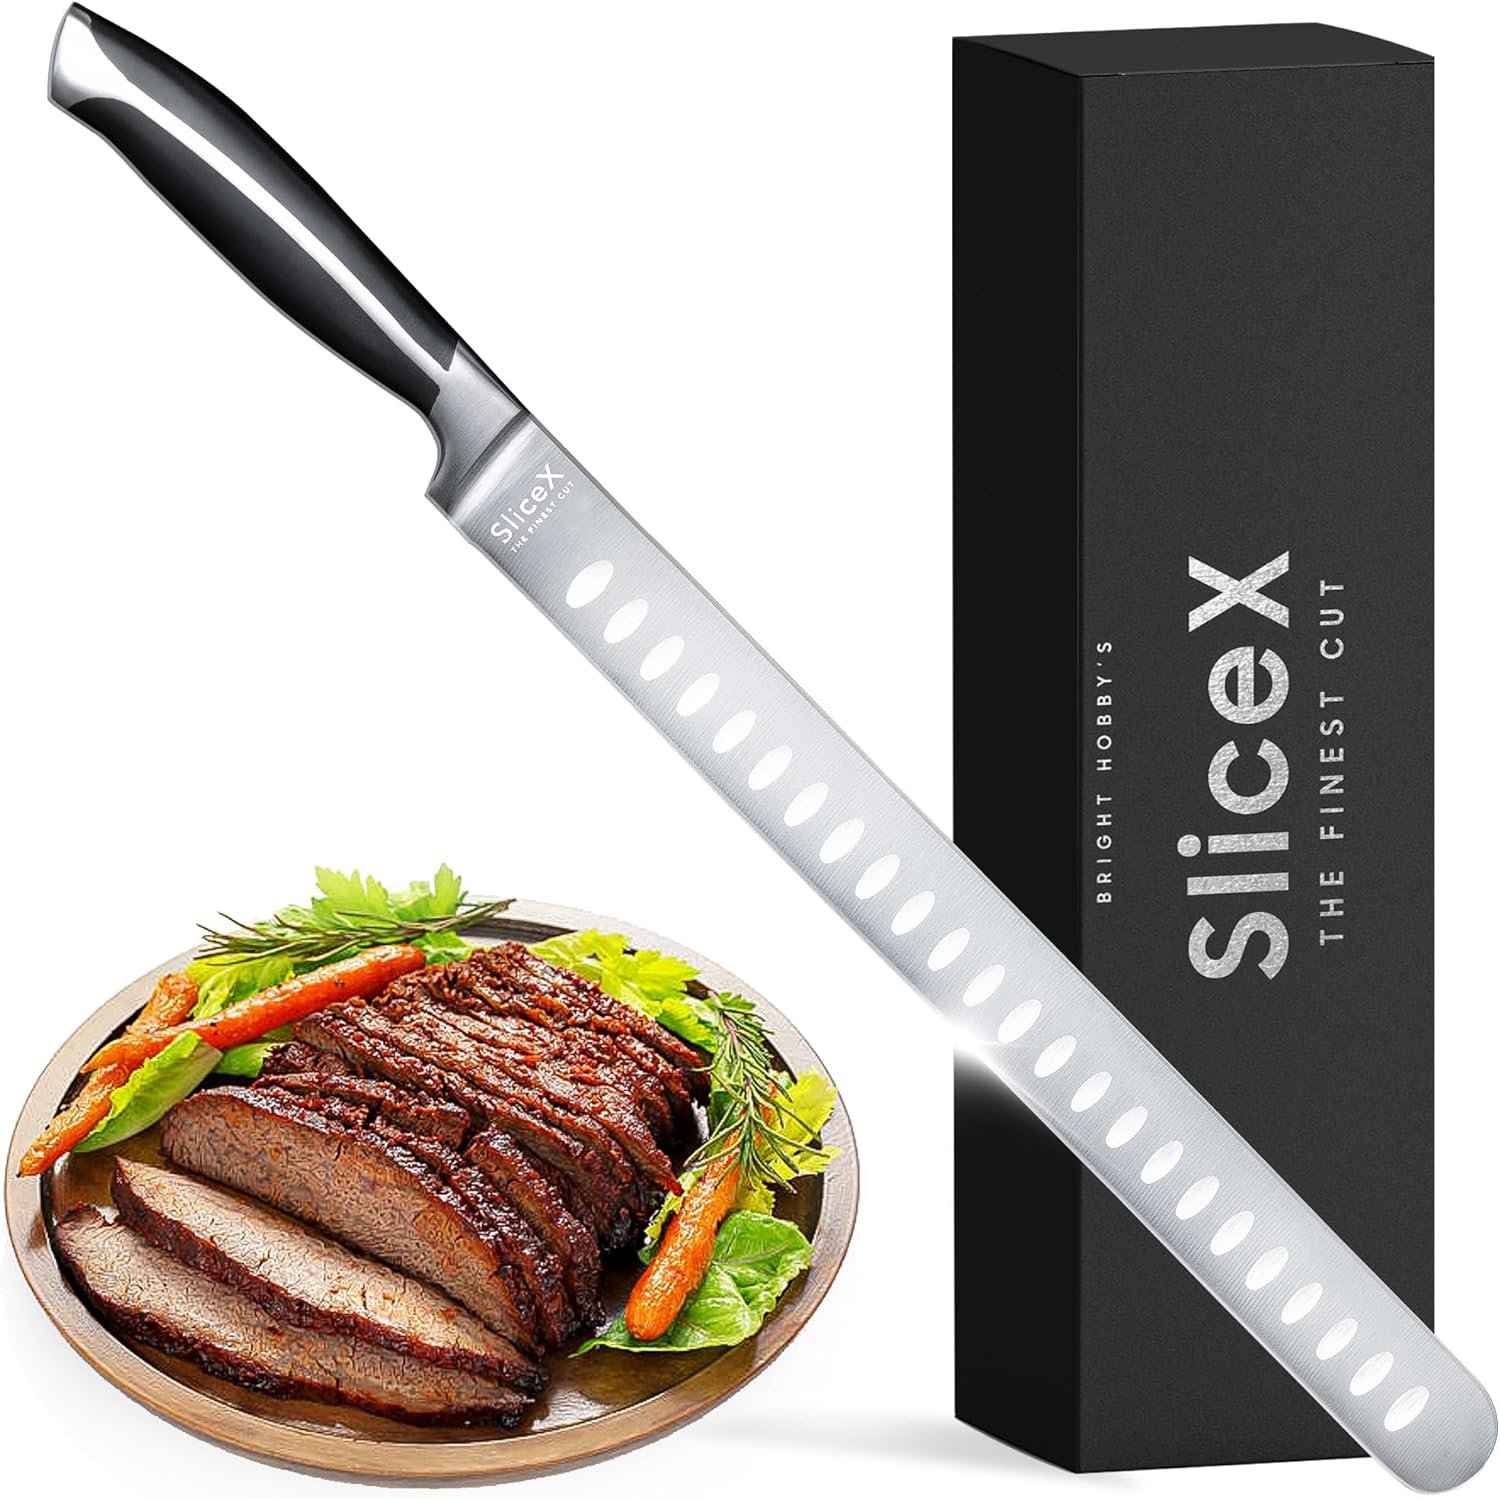 Classic Cuisine Electric Carving Knife Stainless Steel Blade Ham Turkey  Bread Roast Slices Lightweight